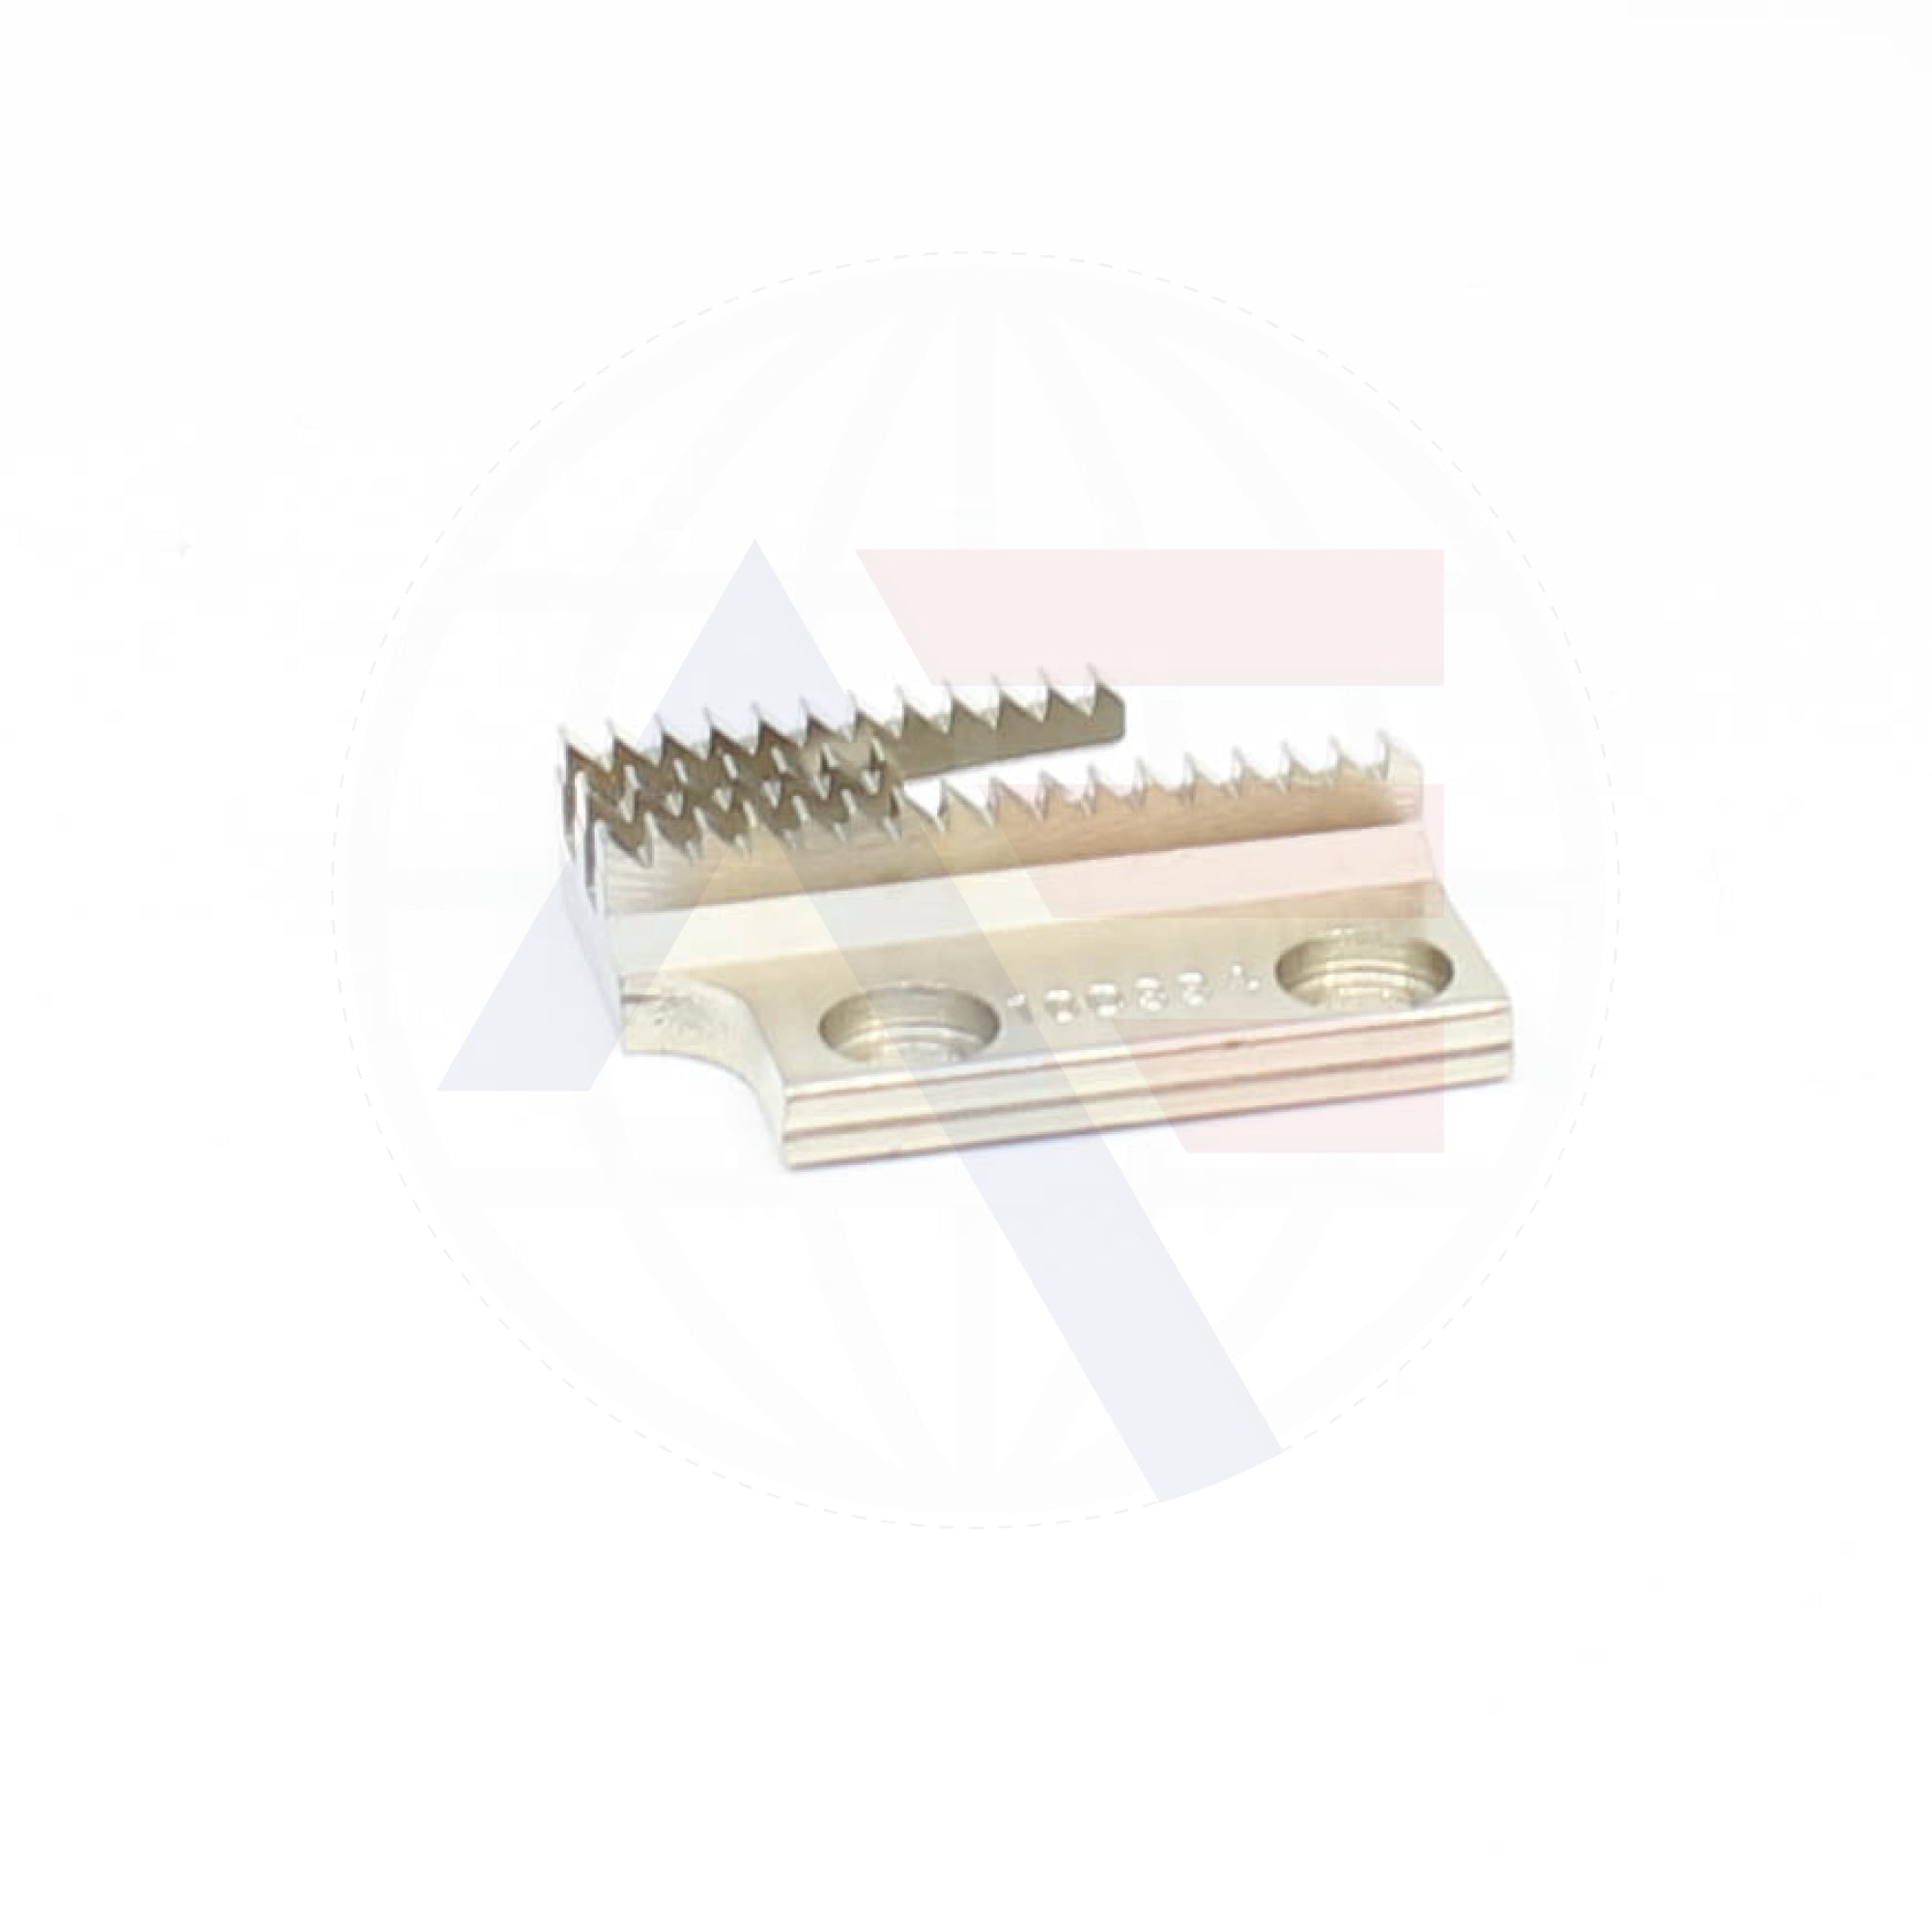 100334001 Feed Dog Brother Generic Sewing Machine Spare Parts